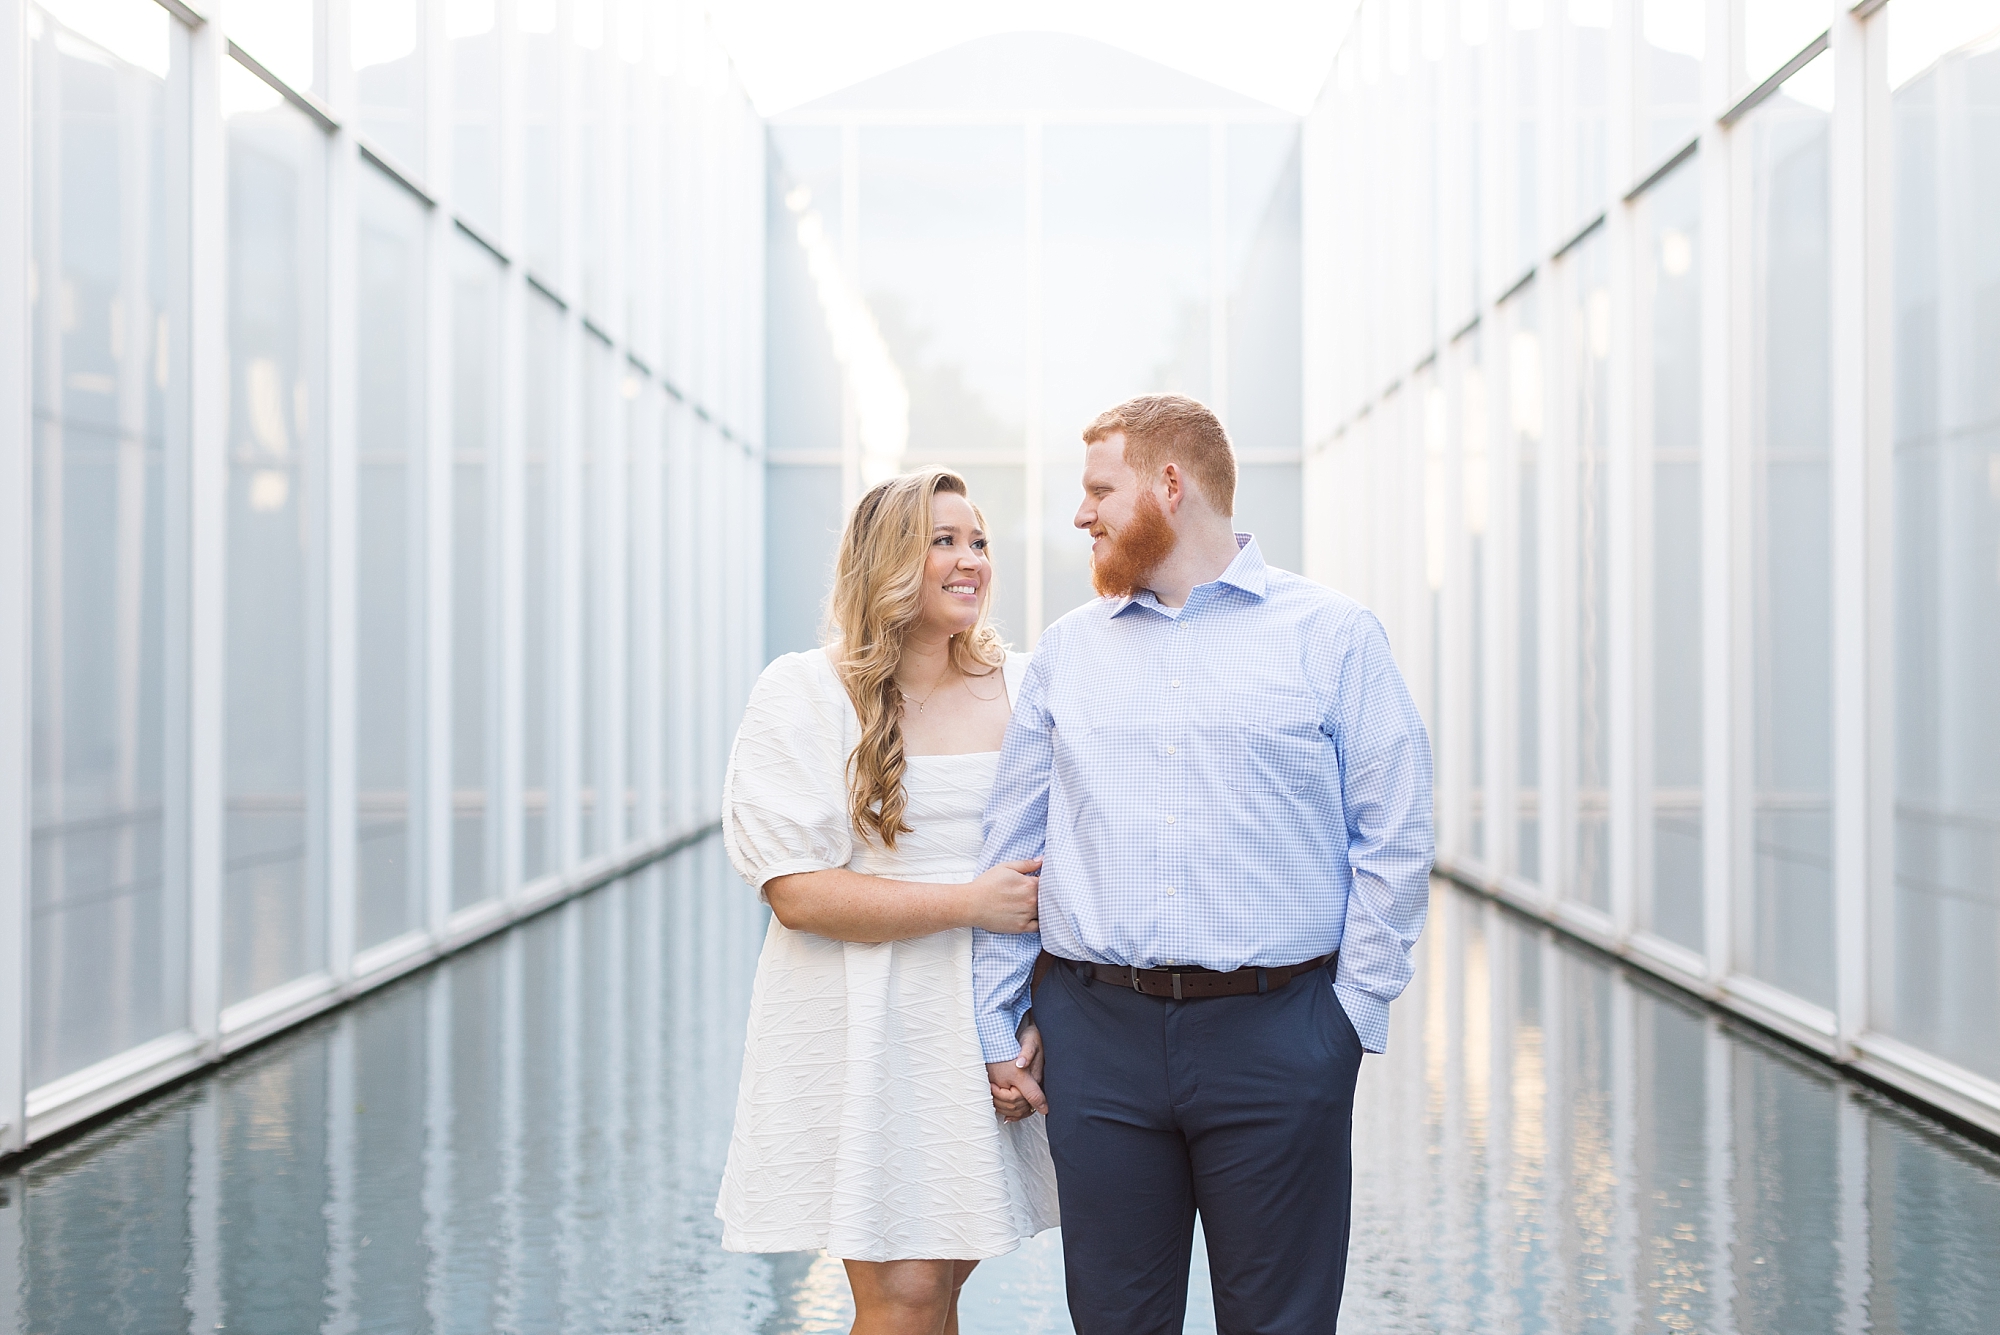 Engagement photos in Raleigh | Raleigh NC Engagement Photographer